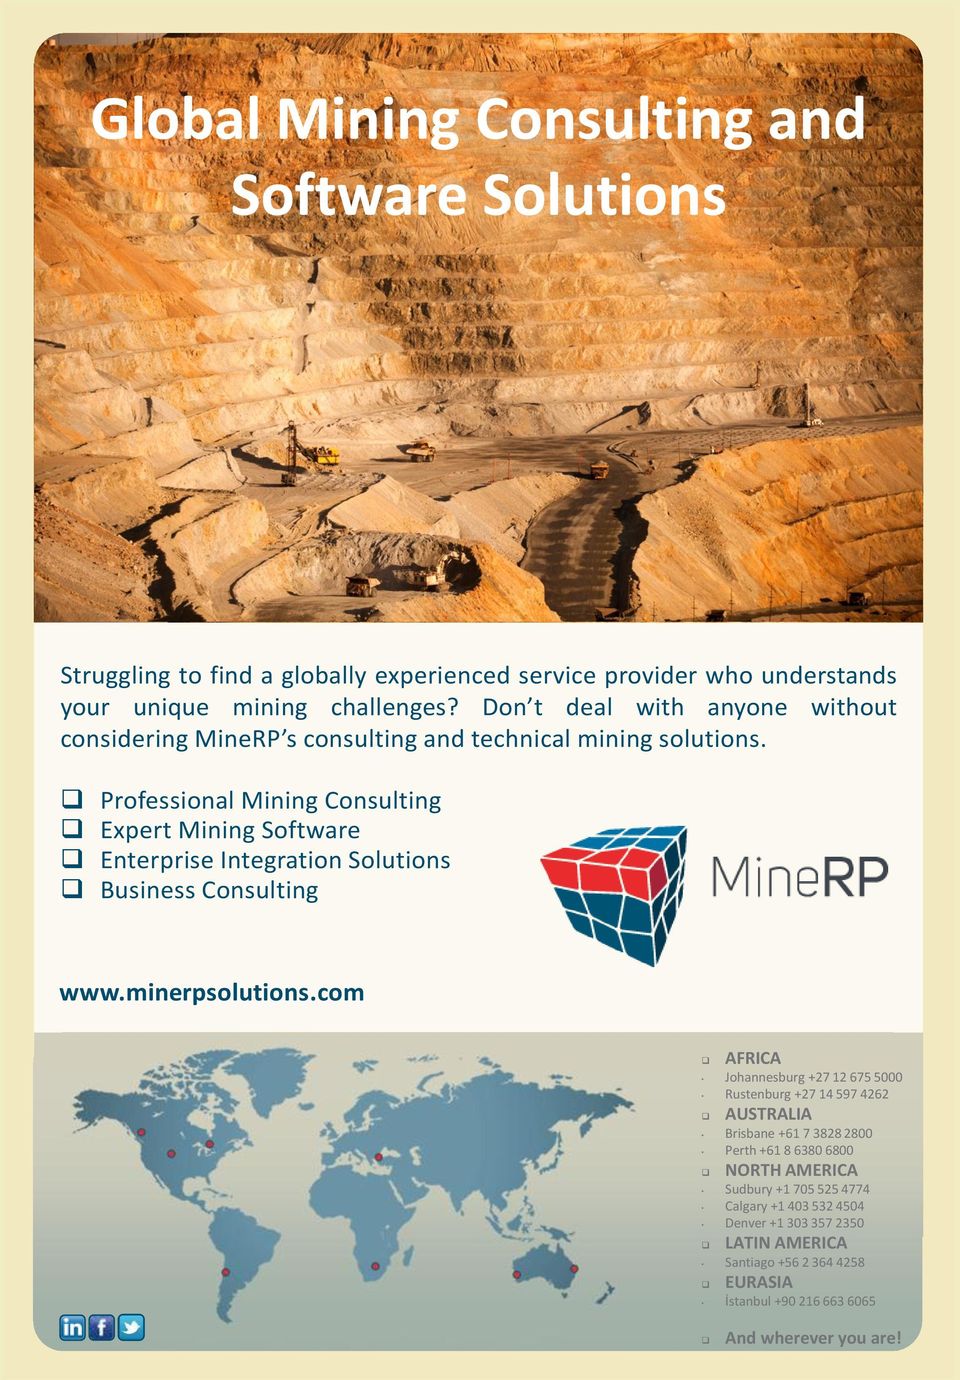 Professional Mining Consulting Expert Mining Software Enterprise Integration Solutions Business Consulting www.minerpsolutions.